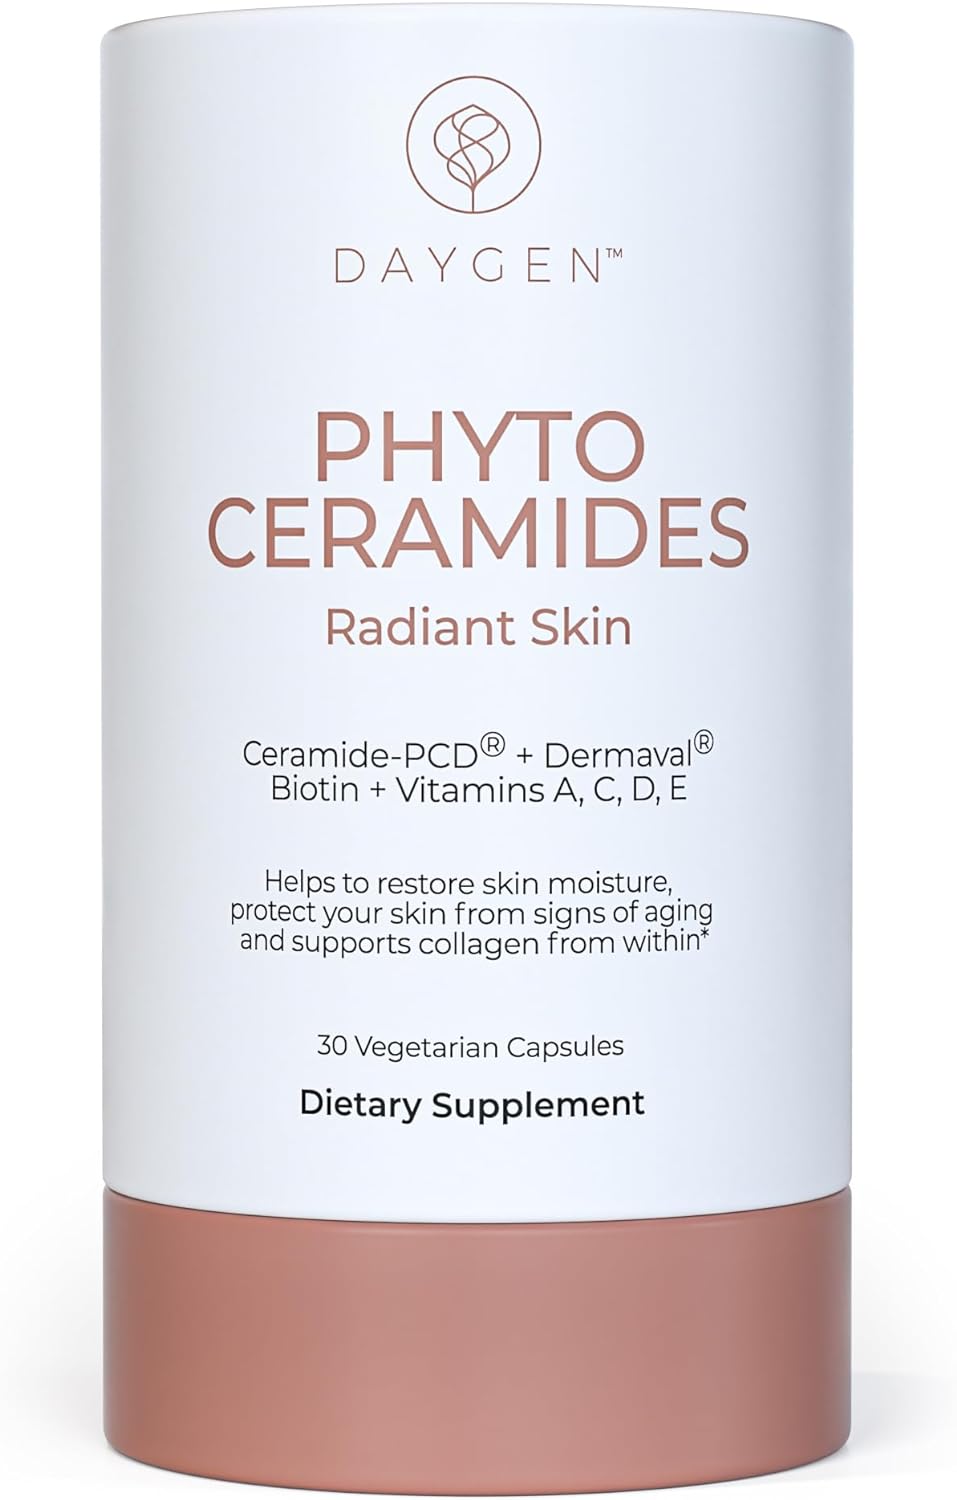 DAYGEN Phytoceramides Radiant Skin with Ceramides  Dermaval - Restore Skin Moisture, Support Collagen Production, with Biotin and Vitamins A,C,D and E – Gluten Free, Natural, 30 Capsules